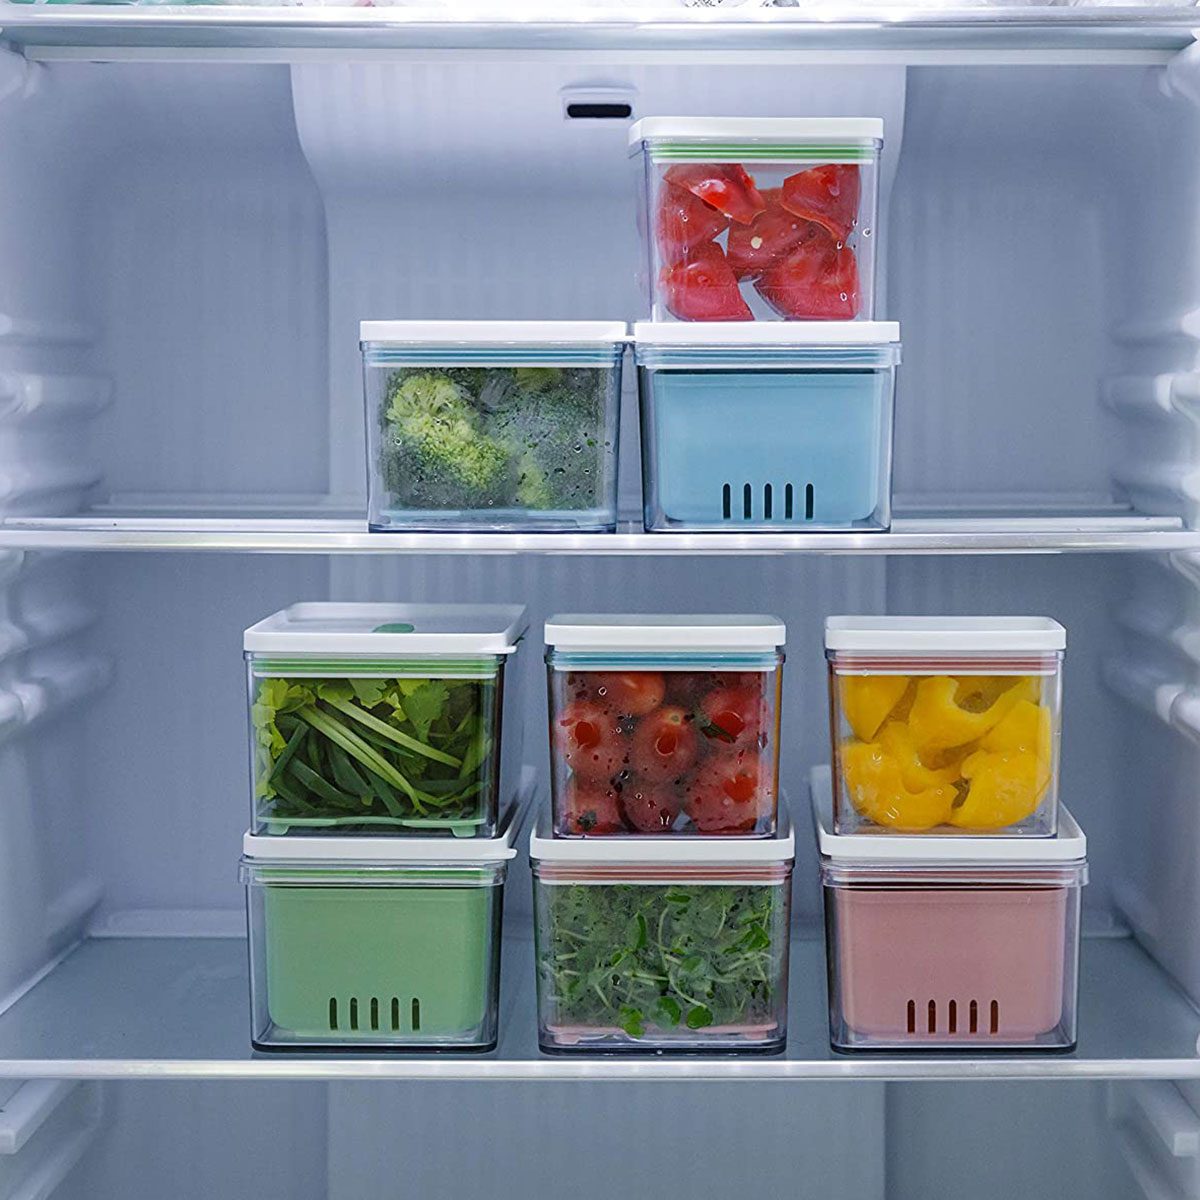 https://www.tasteofhome.com/wp-content/uploads/2023/01/stackable-produce-containers-in-fridge-via-amazon.com-ecomm-SQ.jpg?fit=700%2C1024